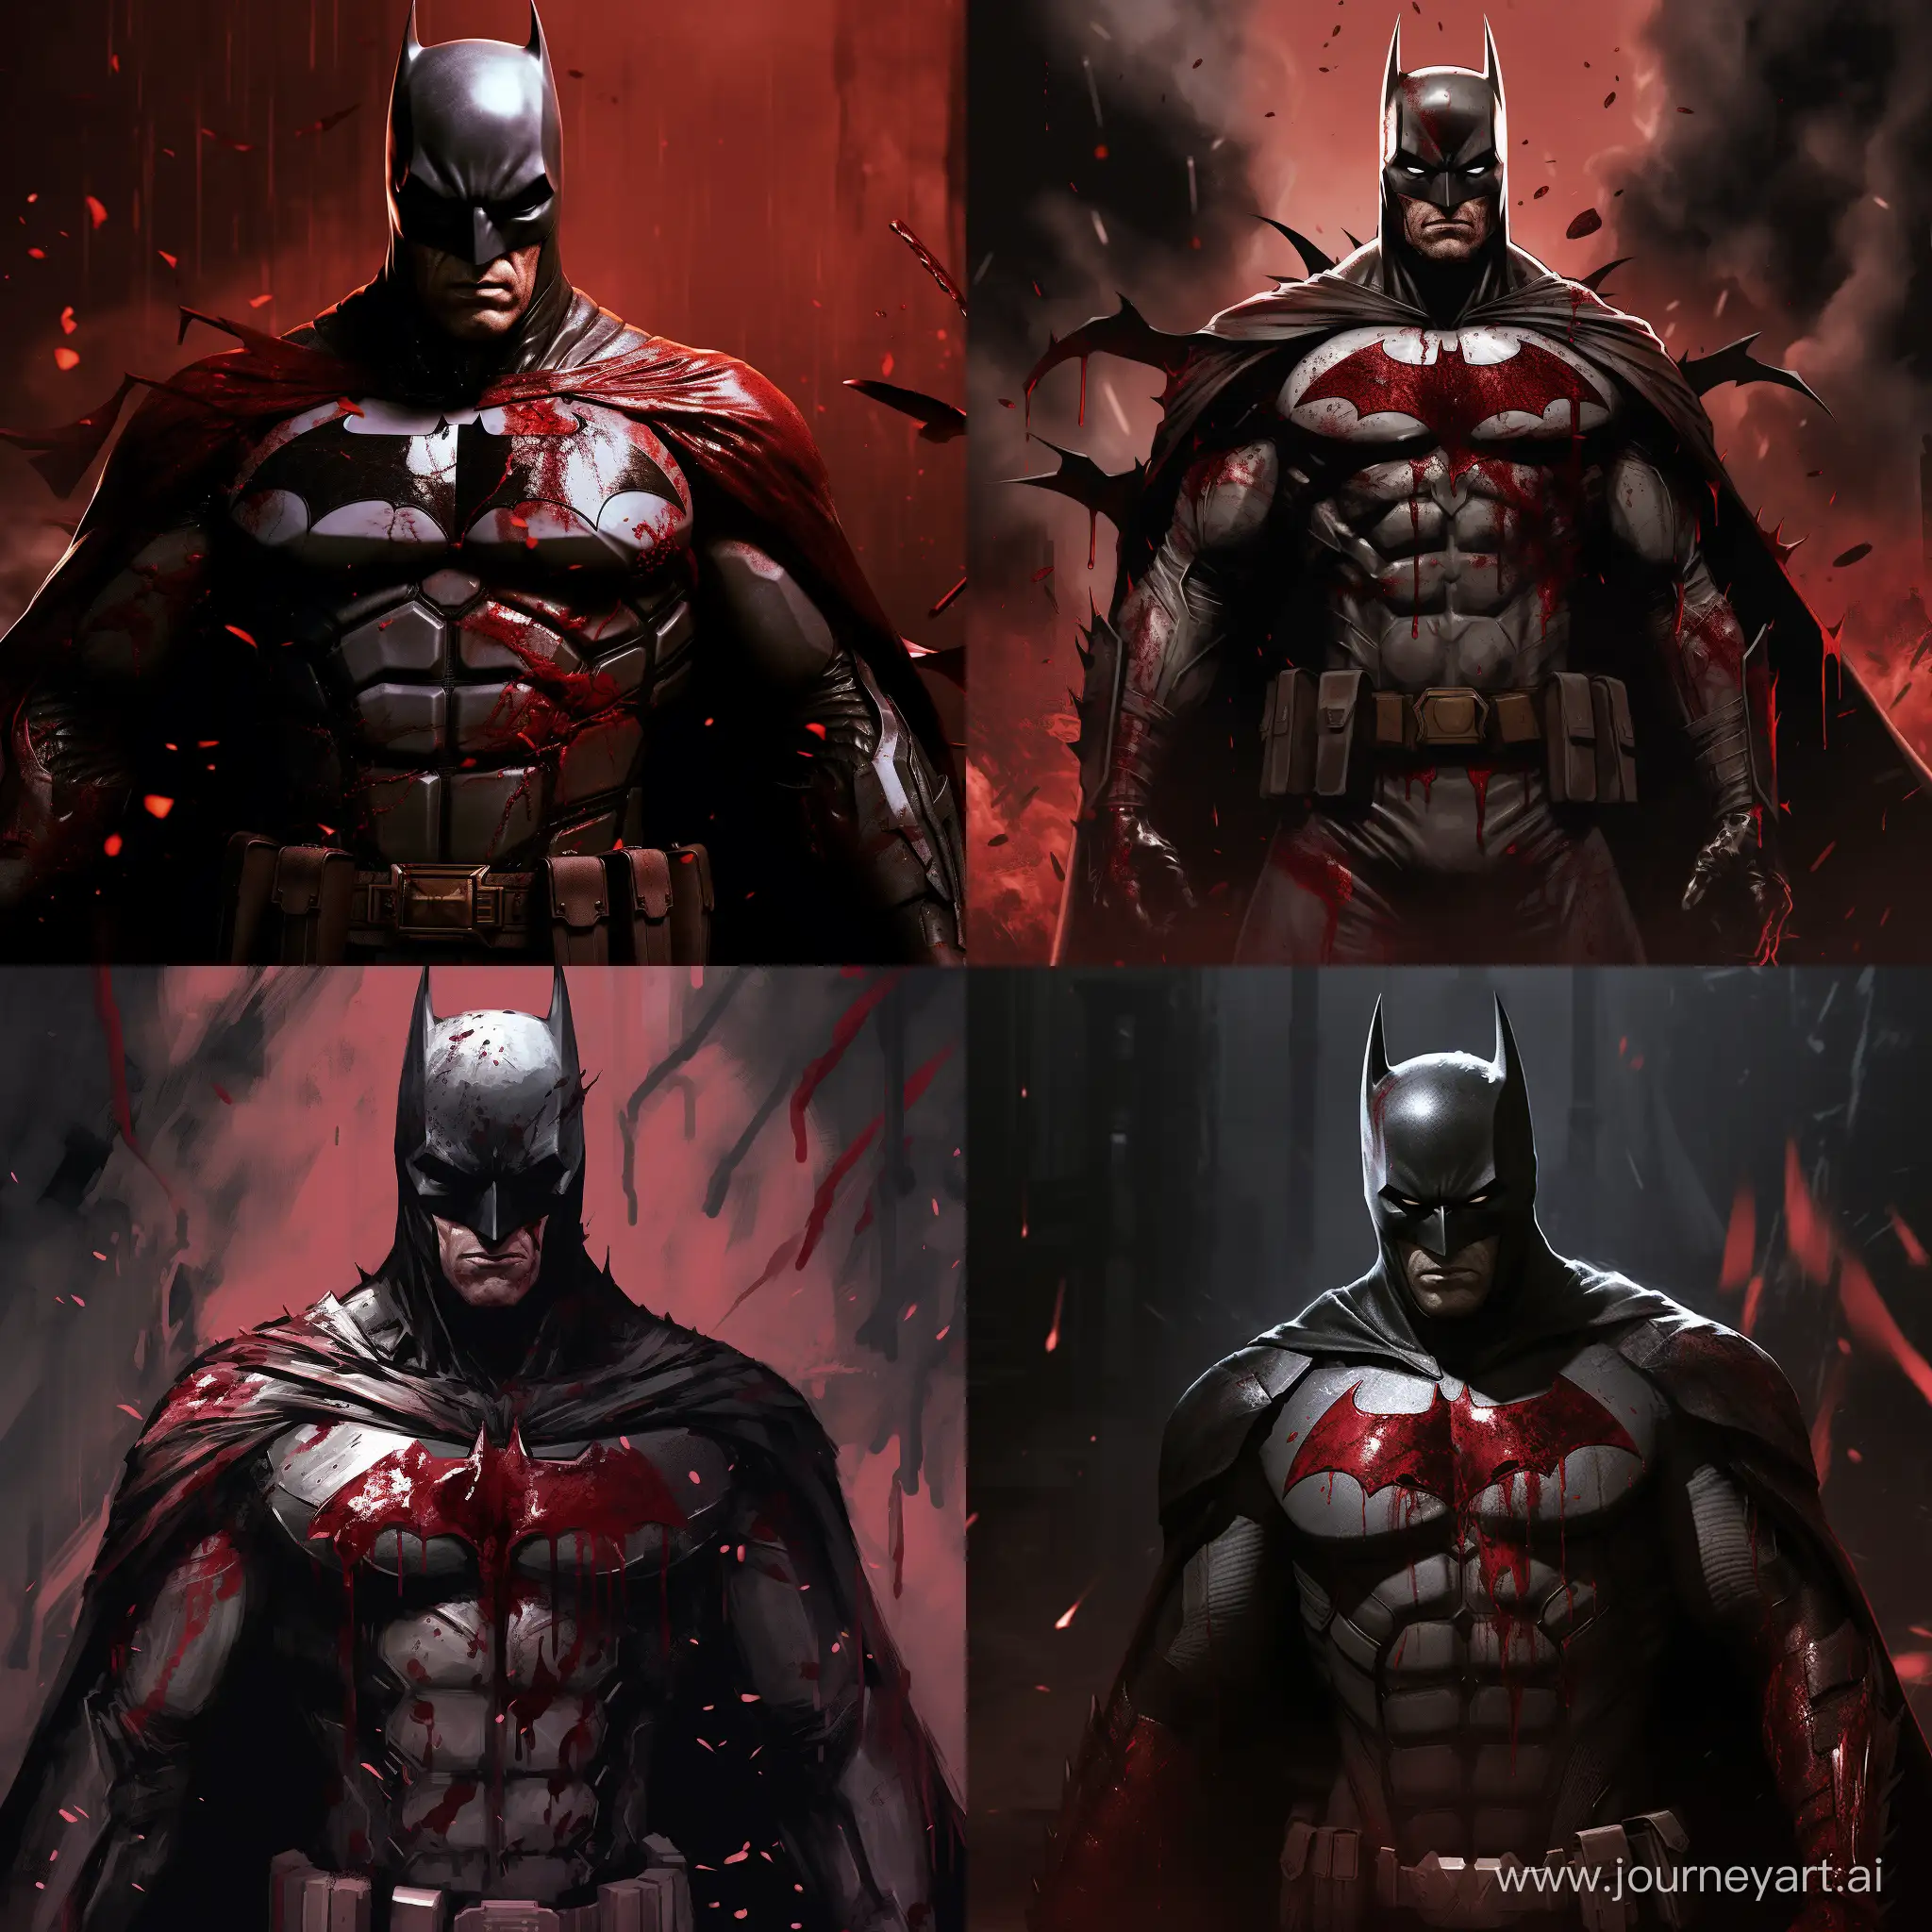 Injured-Batman-with-Torn-Suit-and-Bloodstains-Vigilante-Aftermath